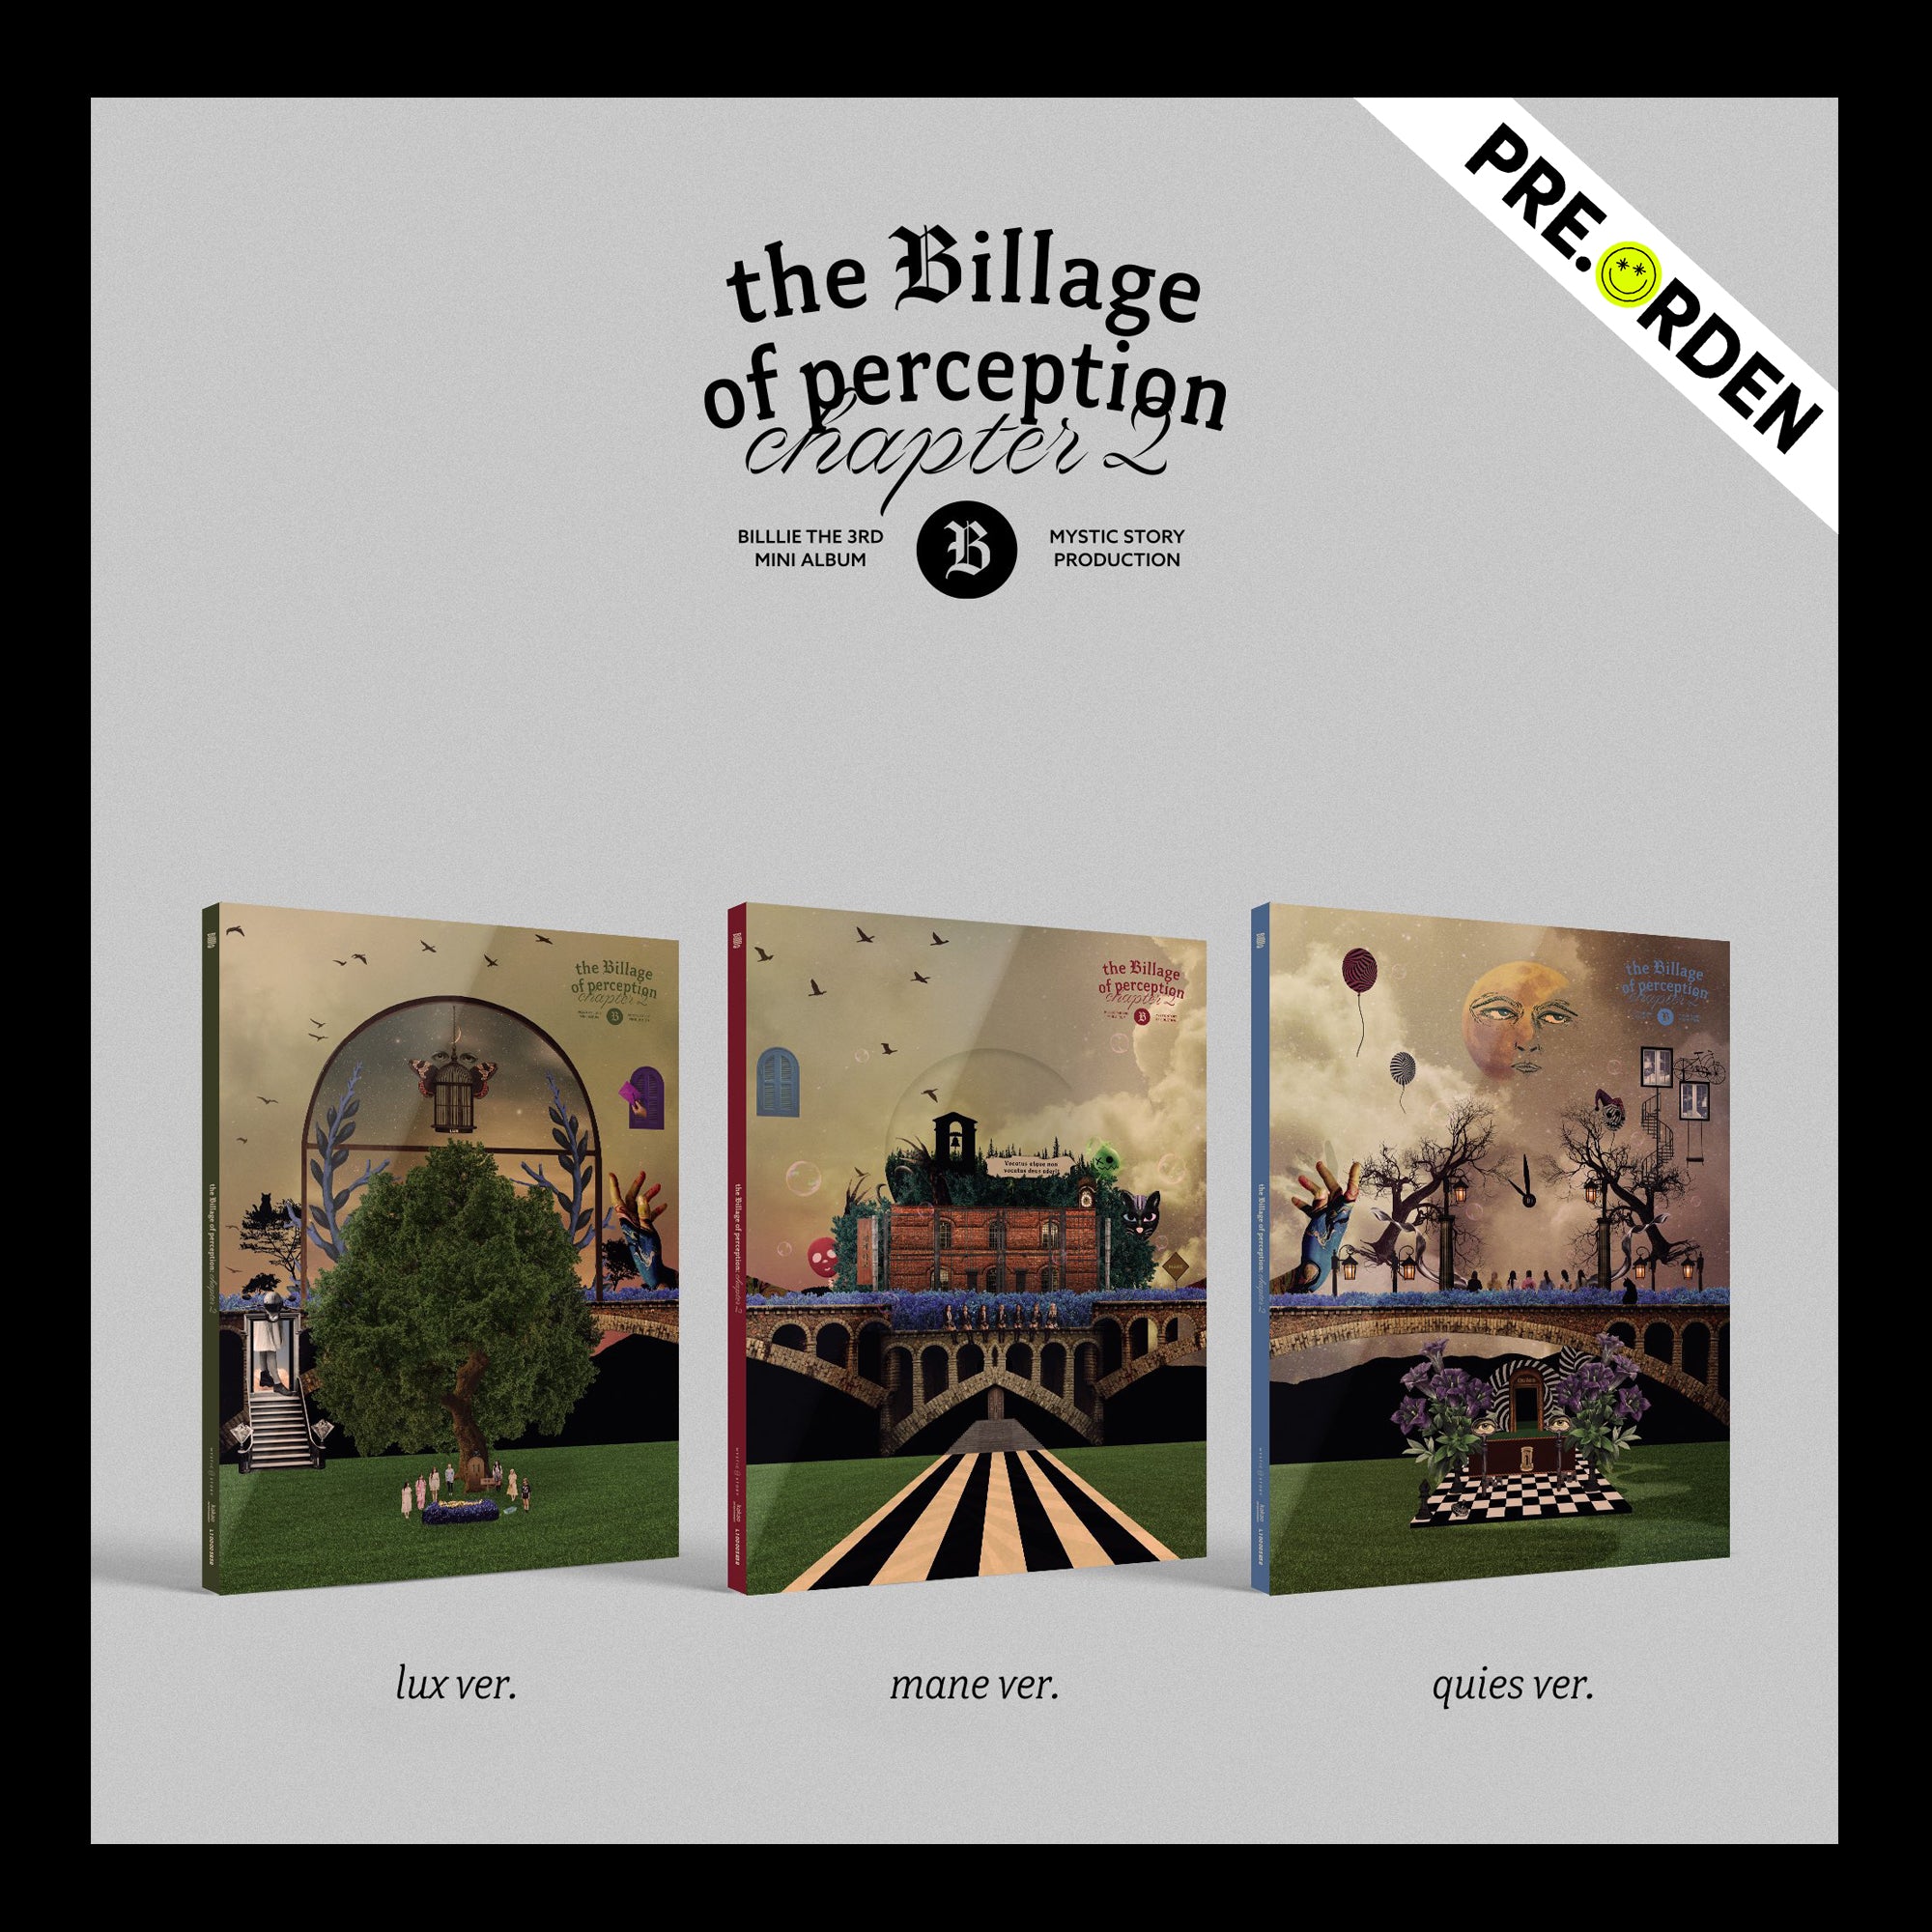 Billlie - The Billage of perception: chapter two